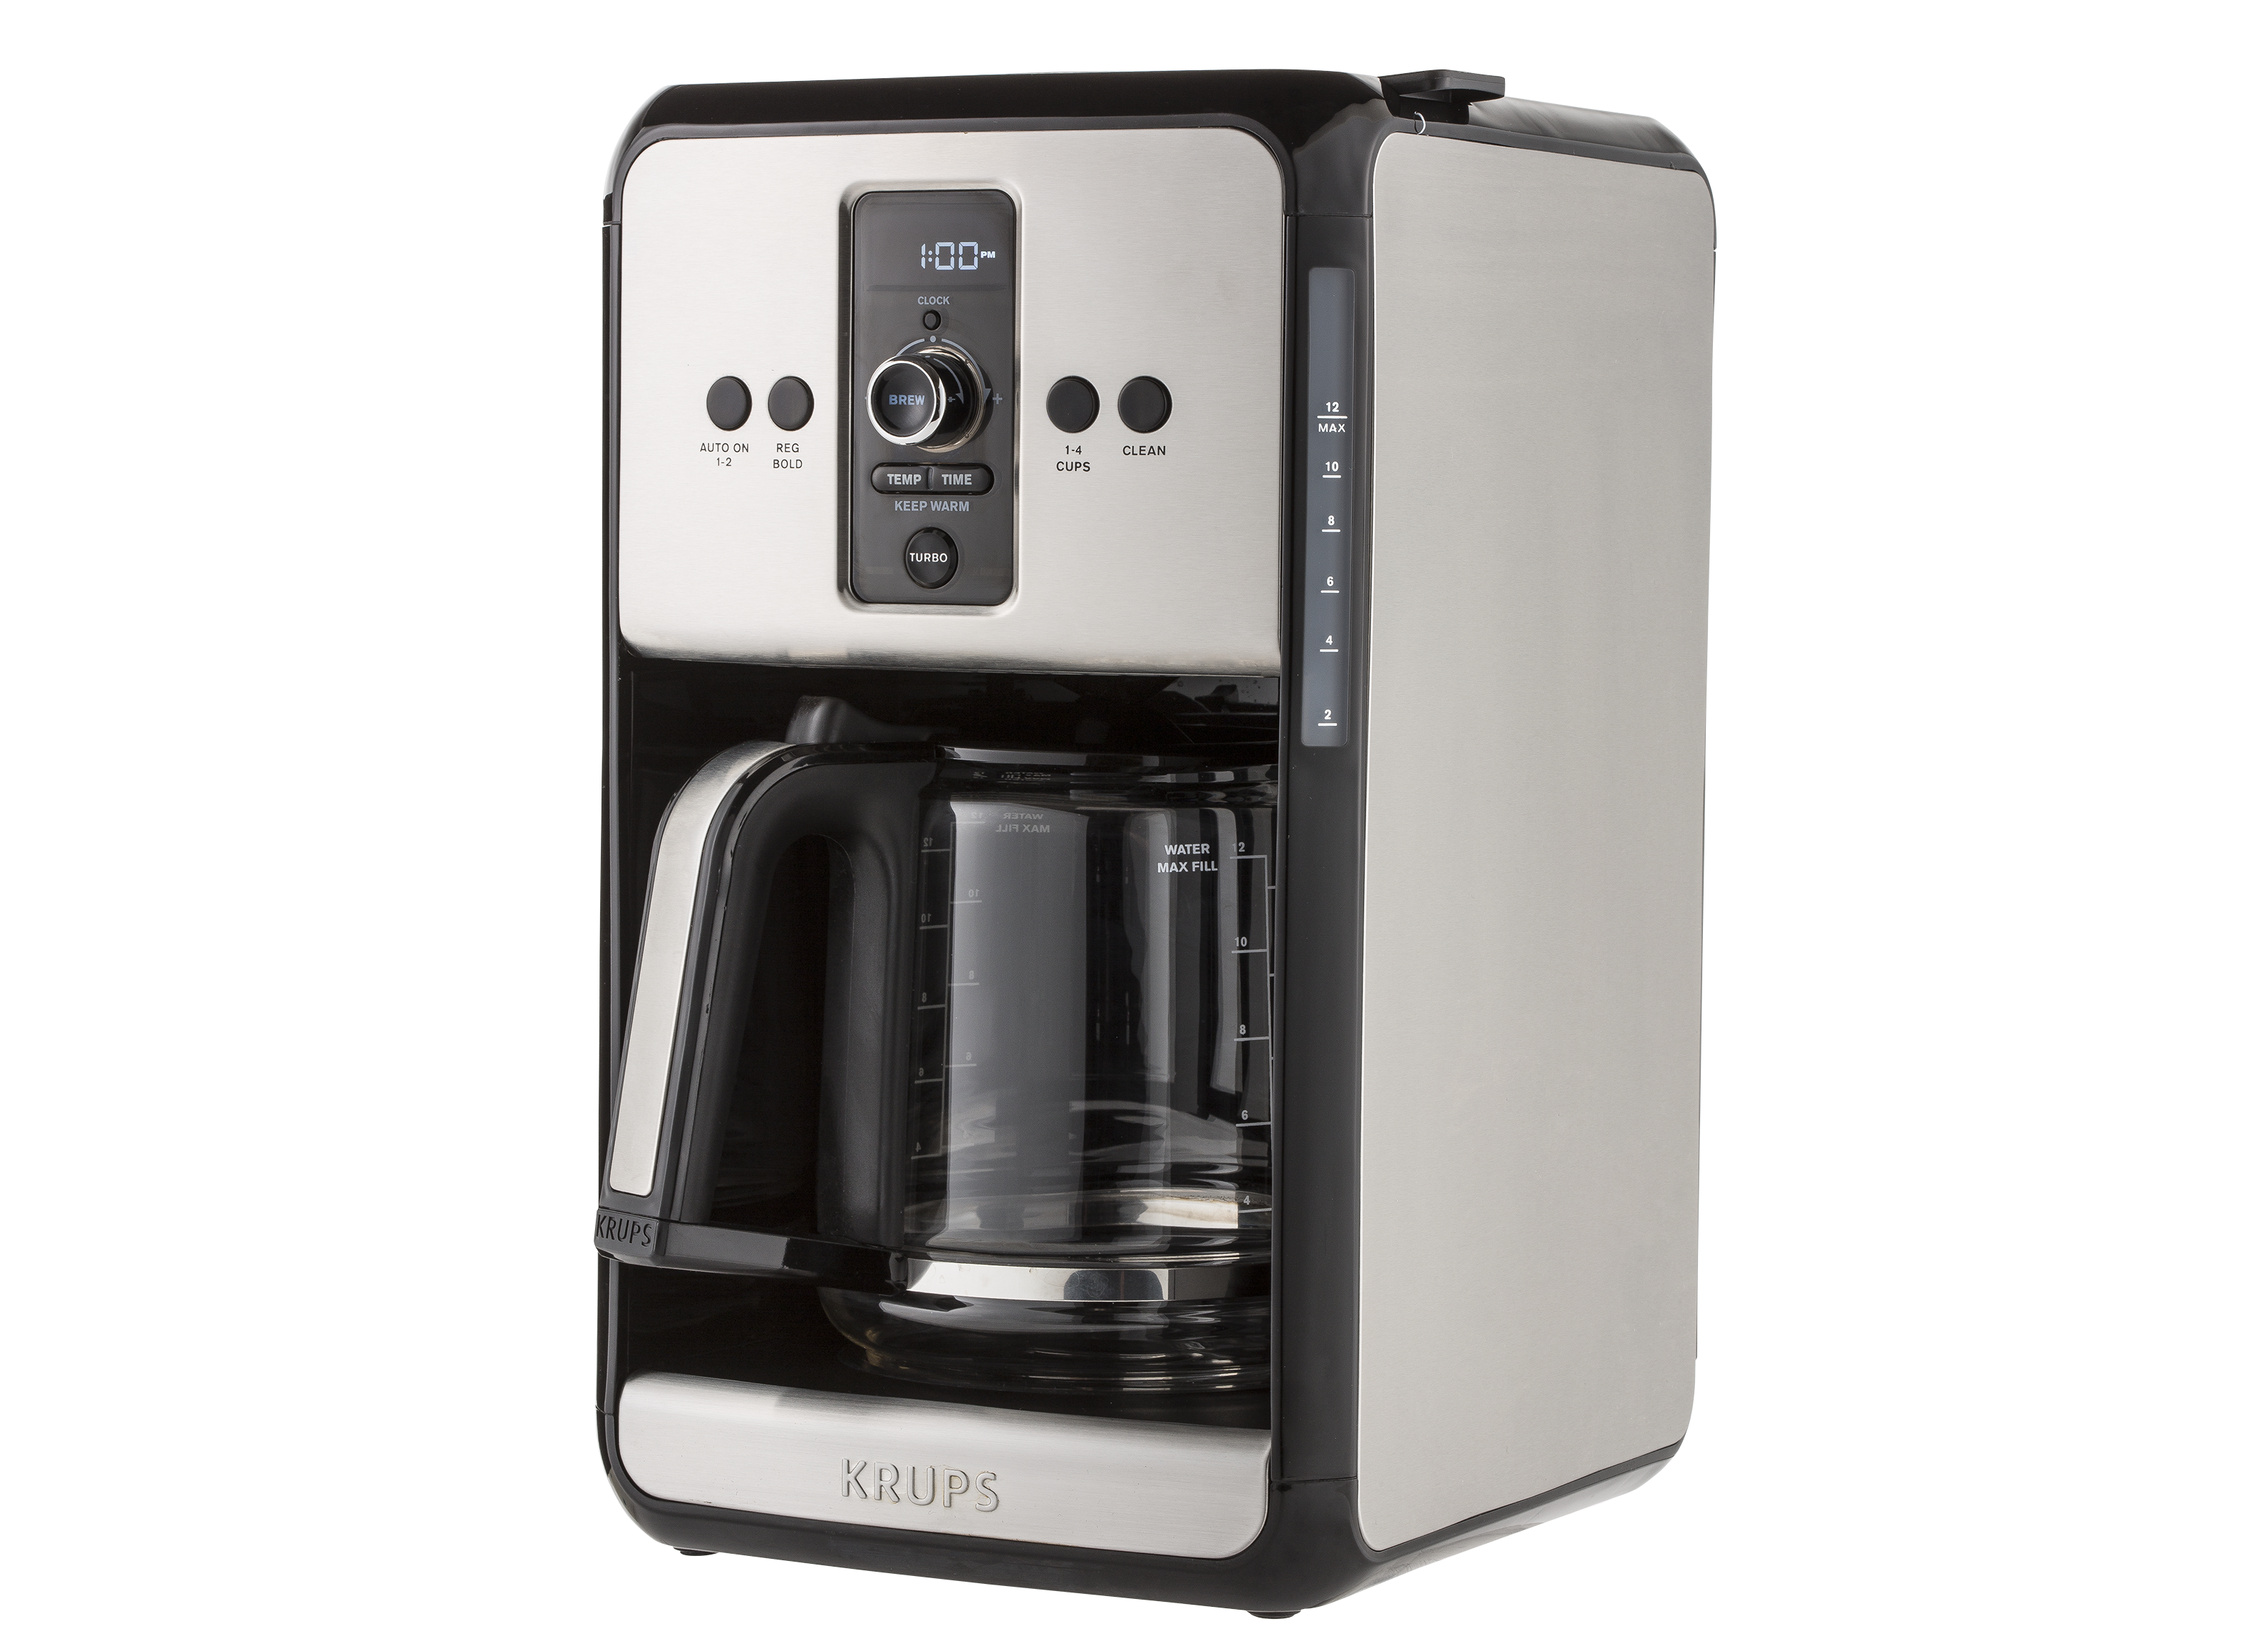 https://crdms.images.consumerreports.org/prod/products/cr/models/388631-coffeemakers-krups-savoyec414050.png